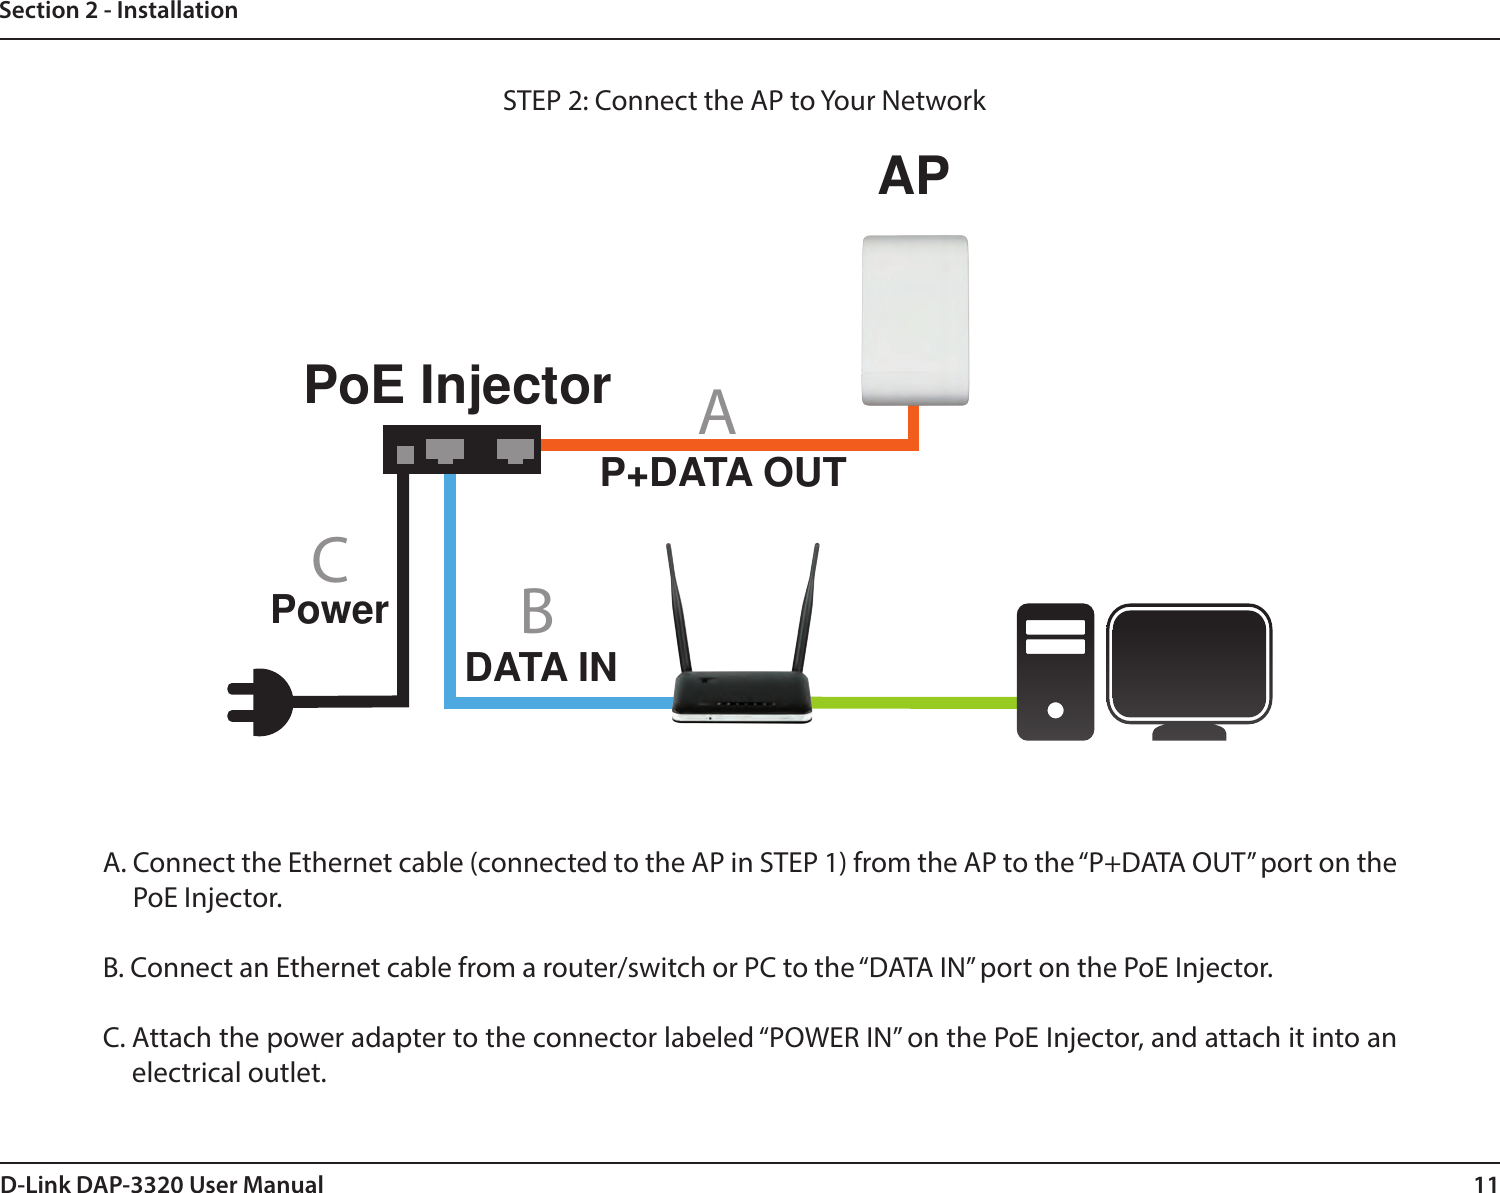 11D-Link DAP-3320 User ManualSection 2 - InstallationA.  Connect the Ethernet cable (connected to the AP in STEP 1) from the AP to the “P+DATA OUT” port on the PoE Injector.B.  Connect an Ethernet cable from a router/switch or PC to the “DATA IN” port on the PoE Injector.C.  Attach the power adapter to the connector labeled “POWER IN” on the PoE Injector, and attach it into an electrical outlet.P+DATA OUTDATA INPoE Injector ACBAPSTEP 2: Connect the AP to Your NetworkPower